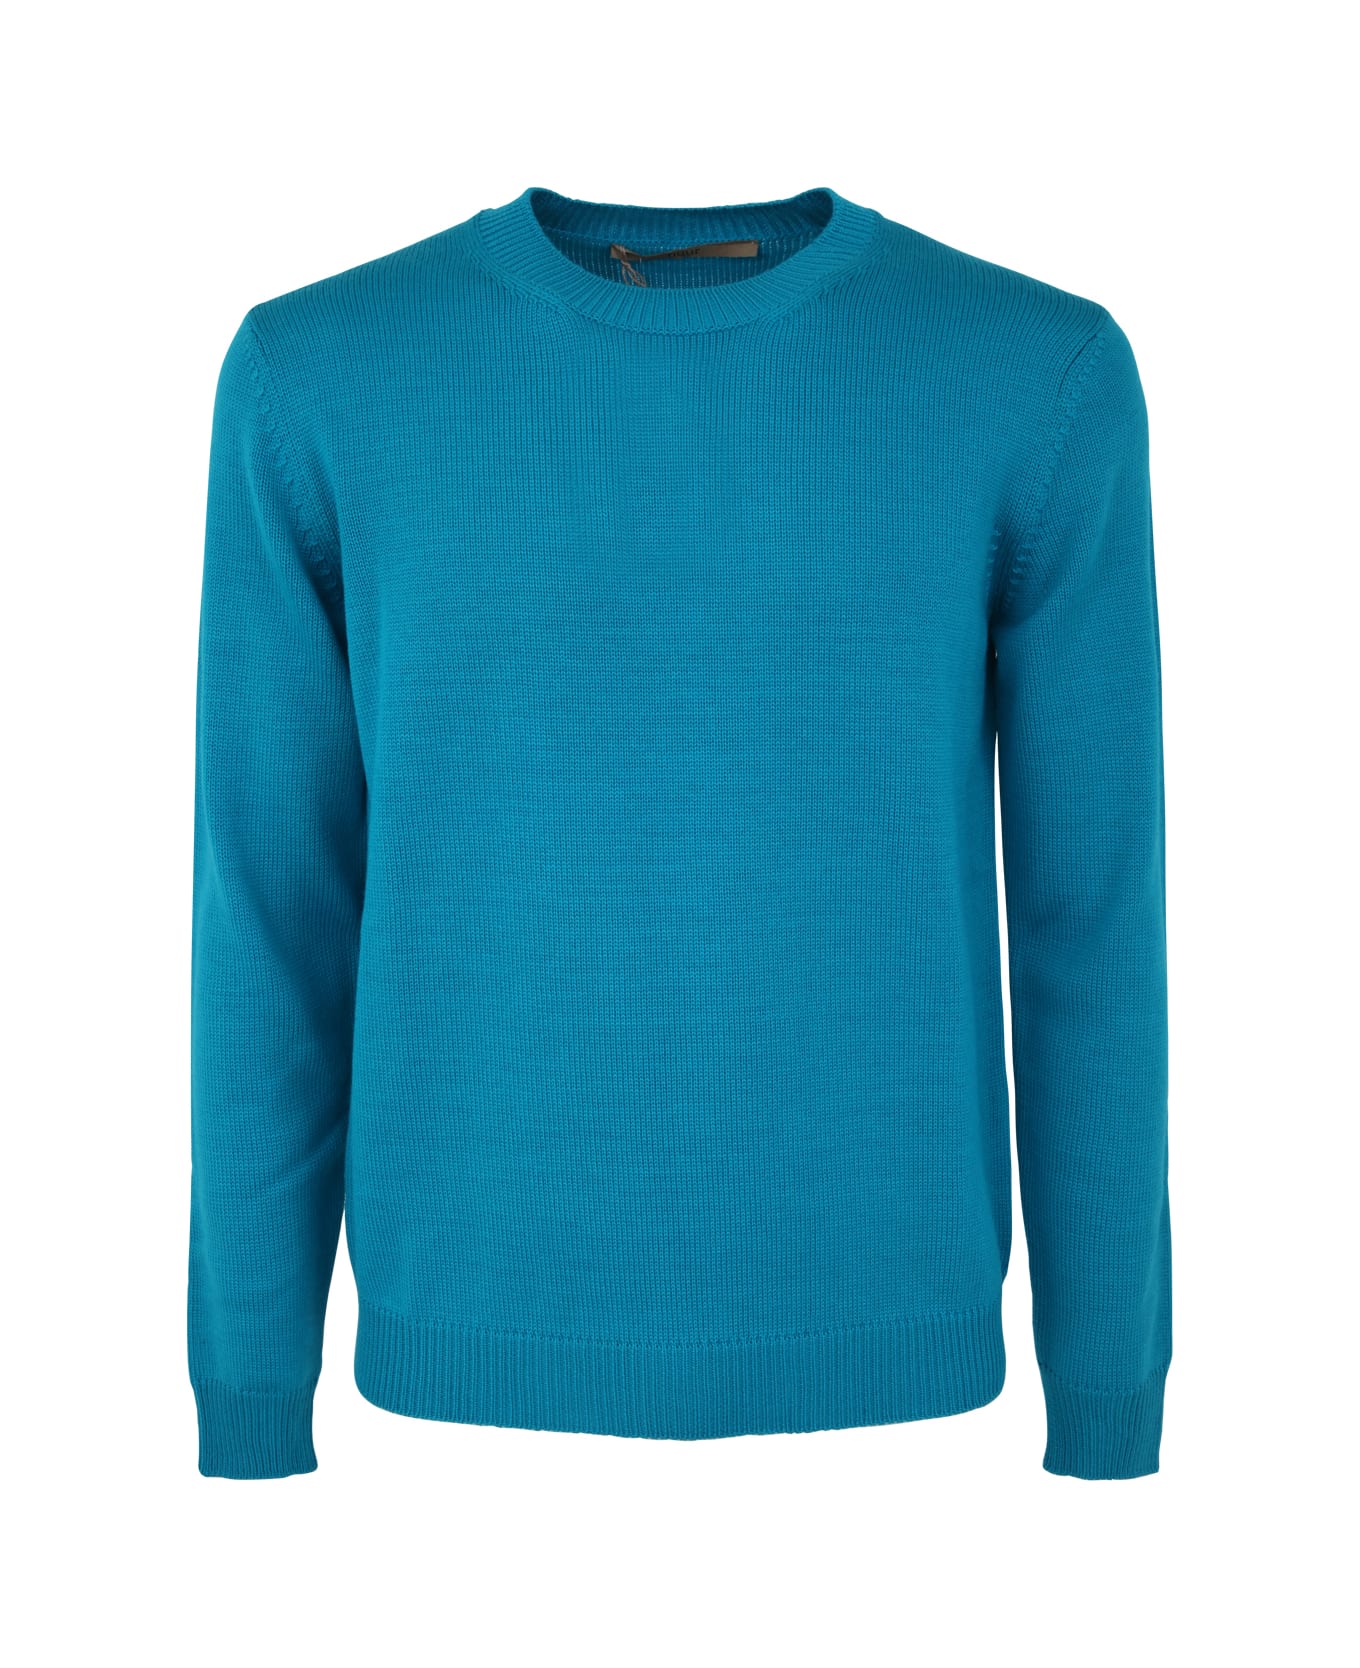 Nuur Long Sleeve Crew Neck Sweater - Turquoise